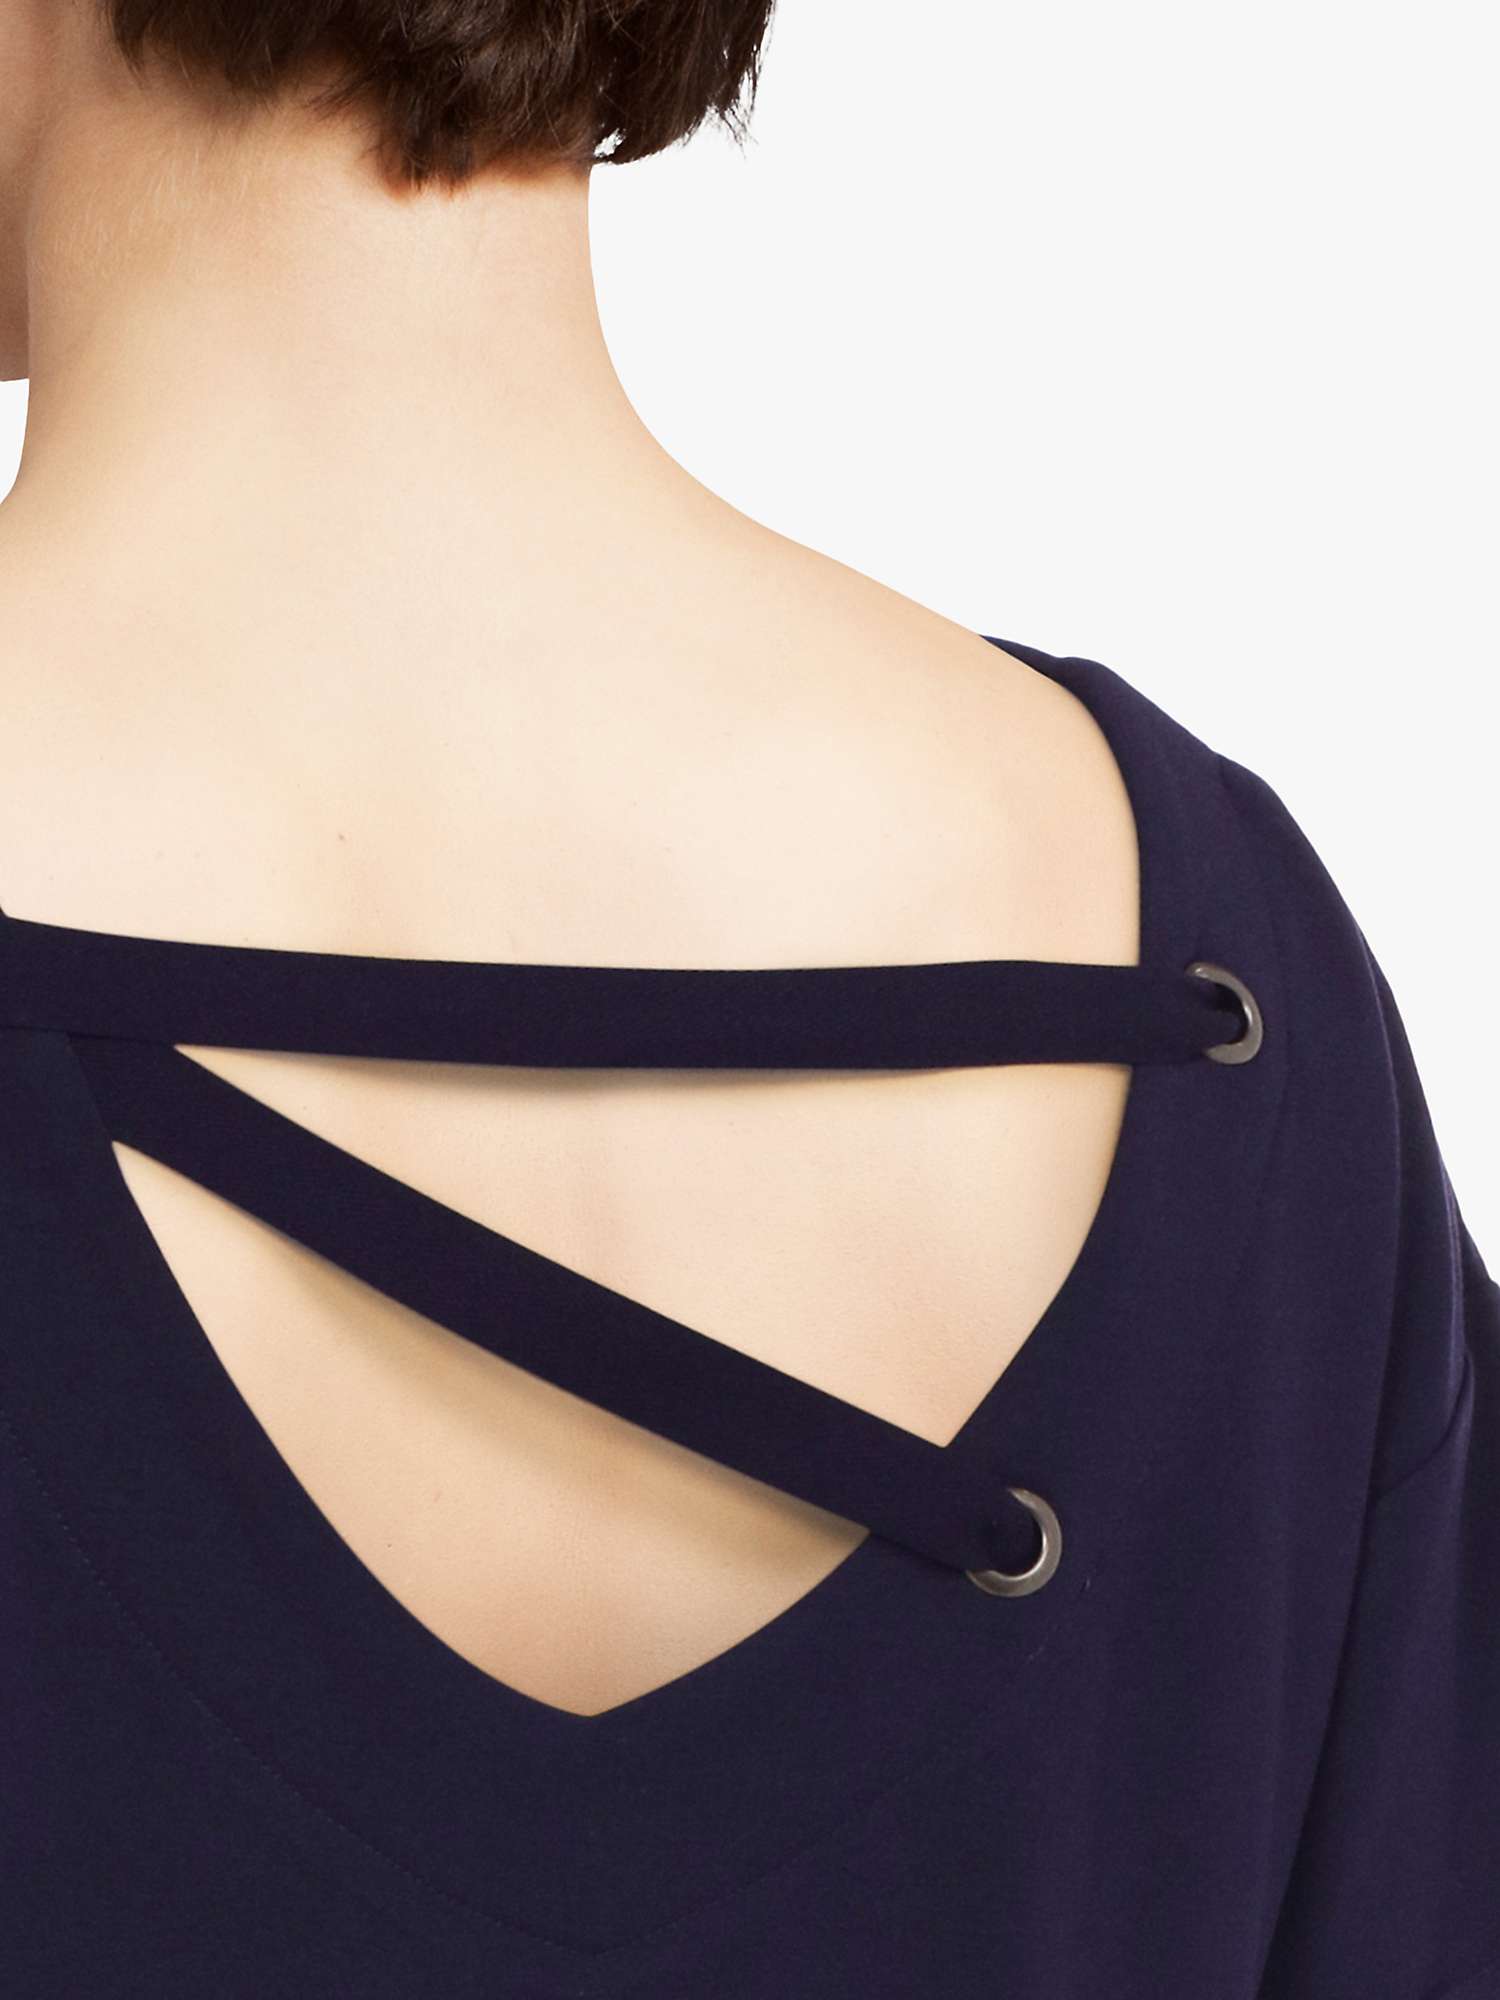 Buy Passionata Huffing Lounge Top, Midnight Blue Online at johnlewis.com